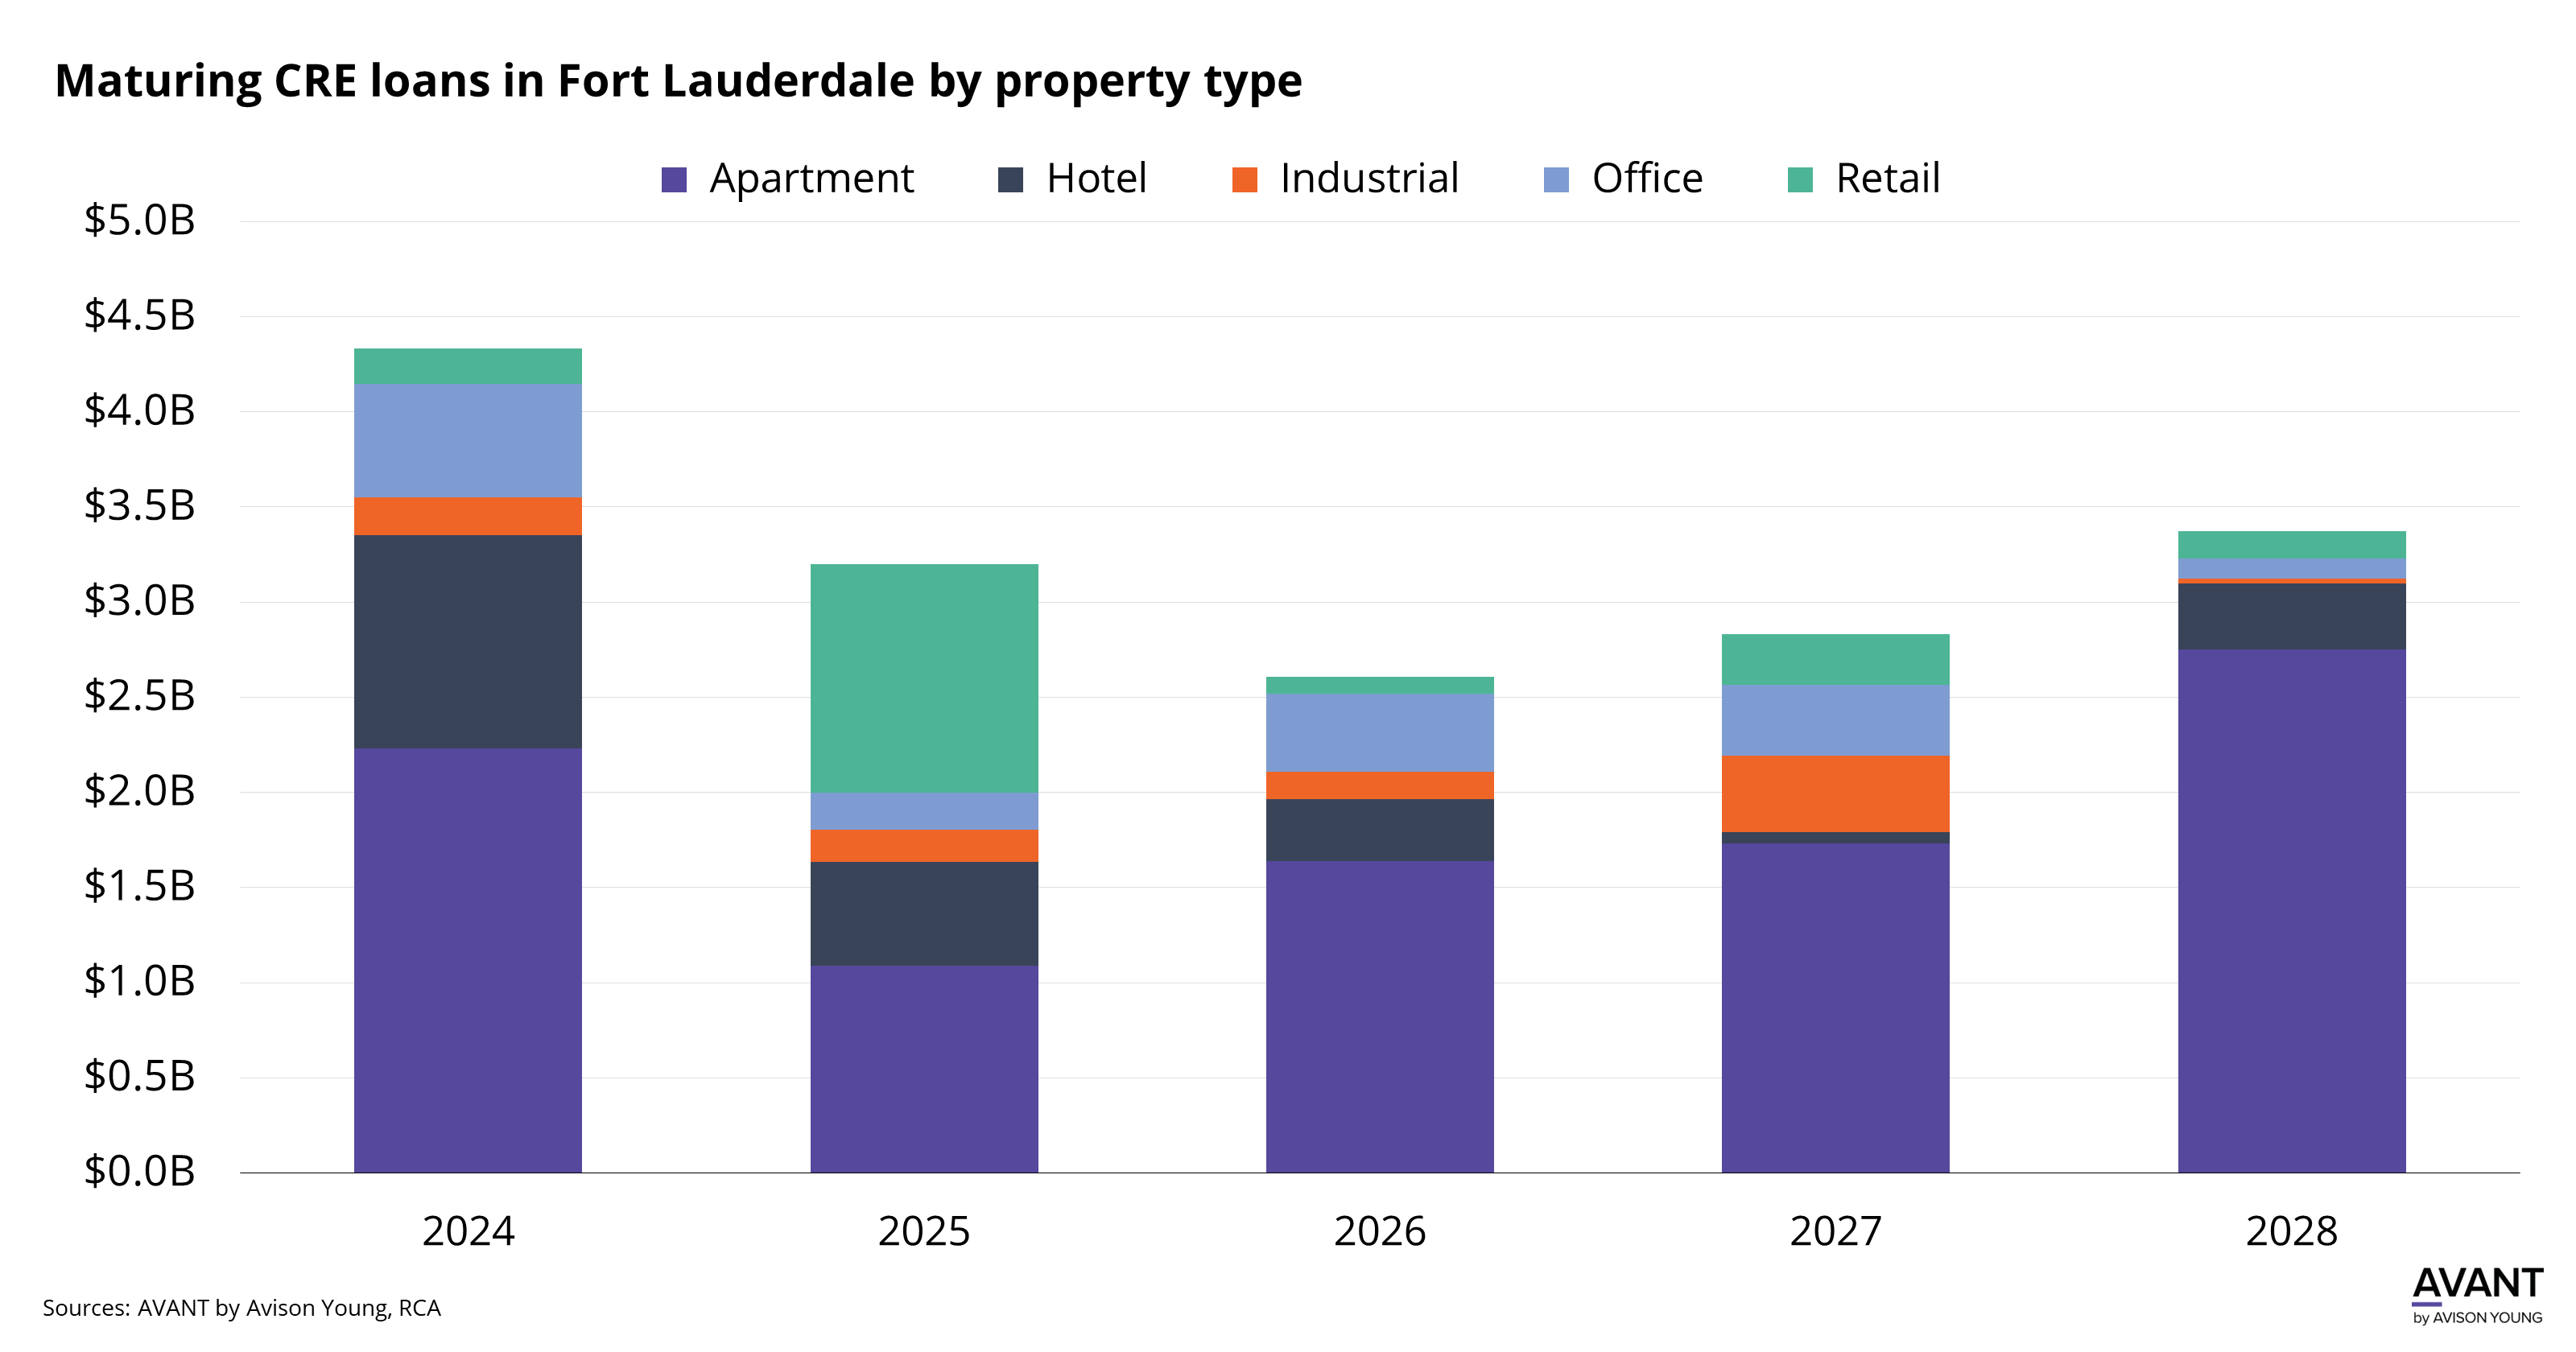 graph of CRE loans maturing in Fort Lauderdale by property type from 2024 to 2028